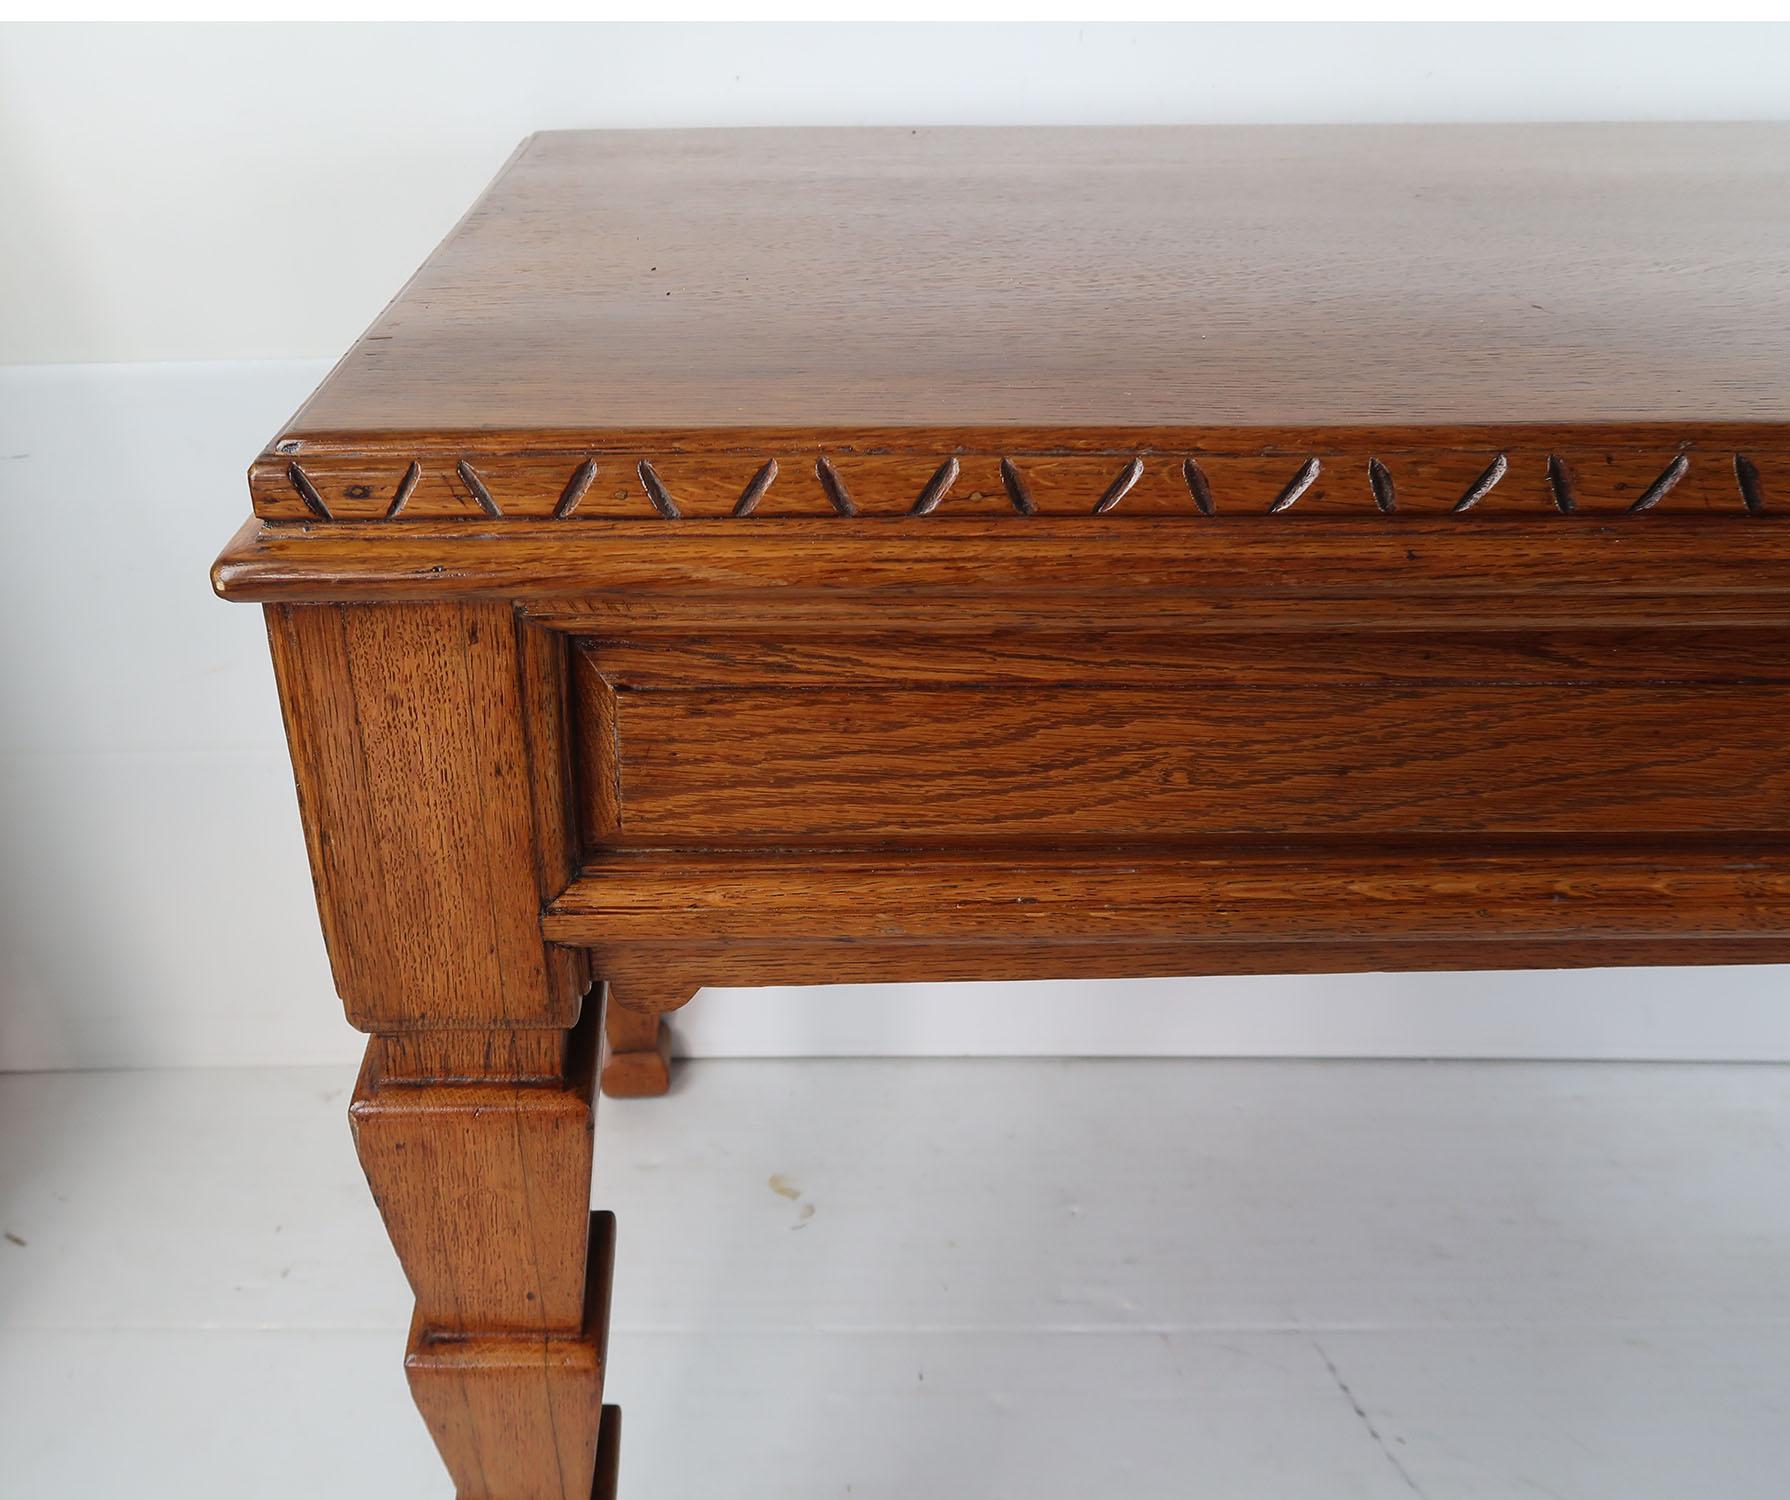 Polished Antique Aesthetic Style Oak Library Table or Desk, circa 1900